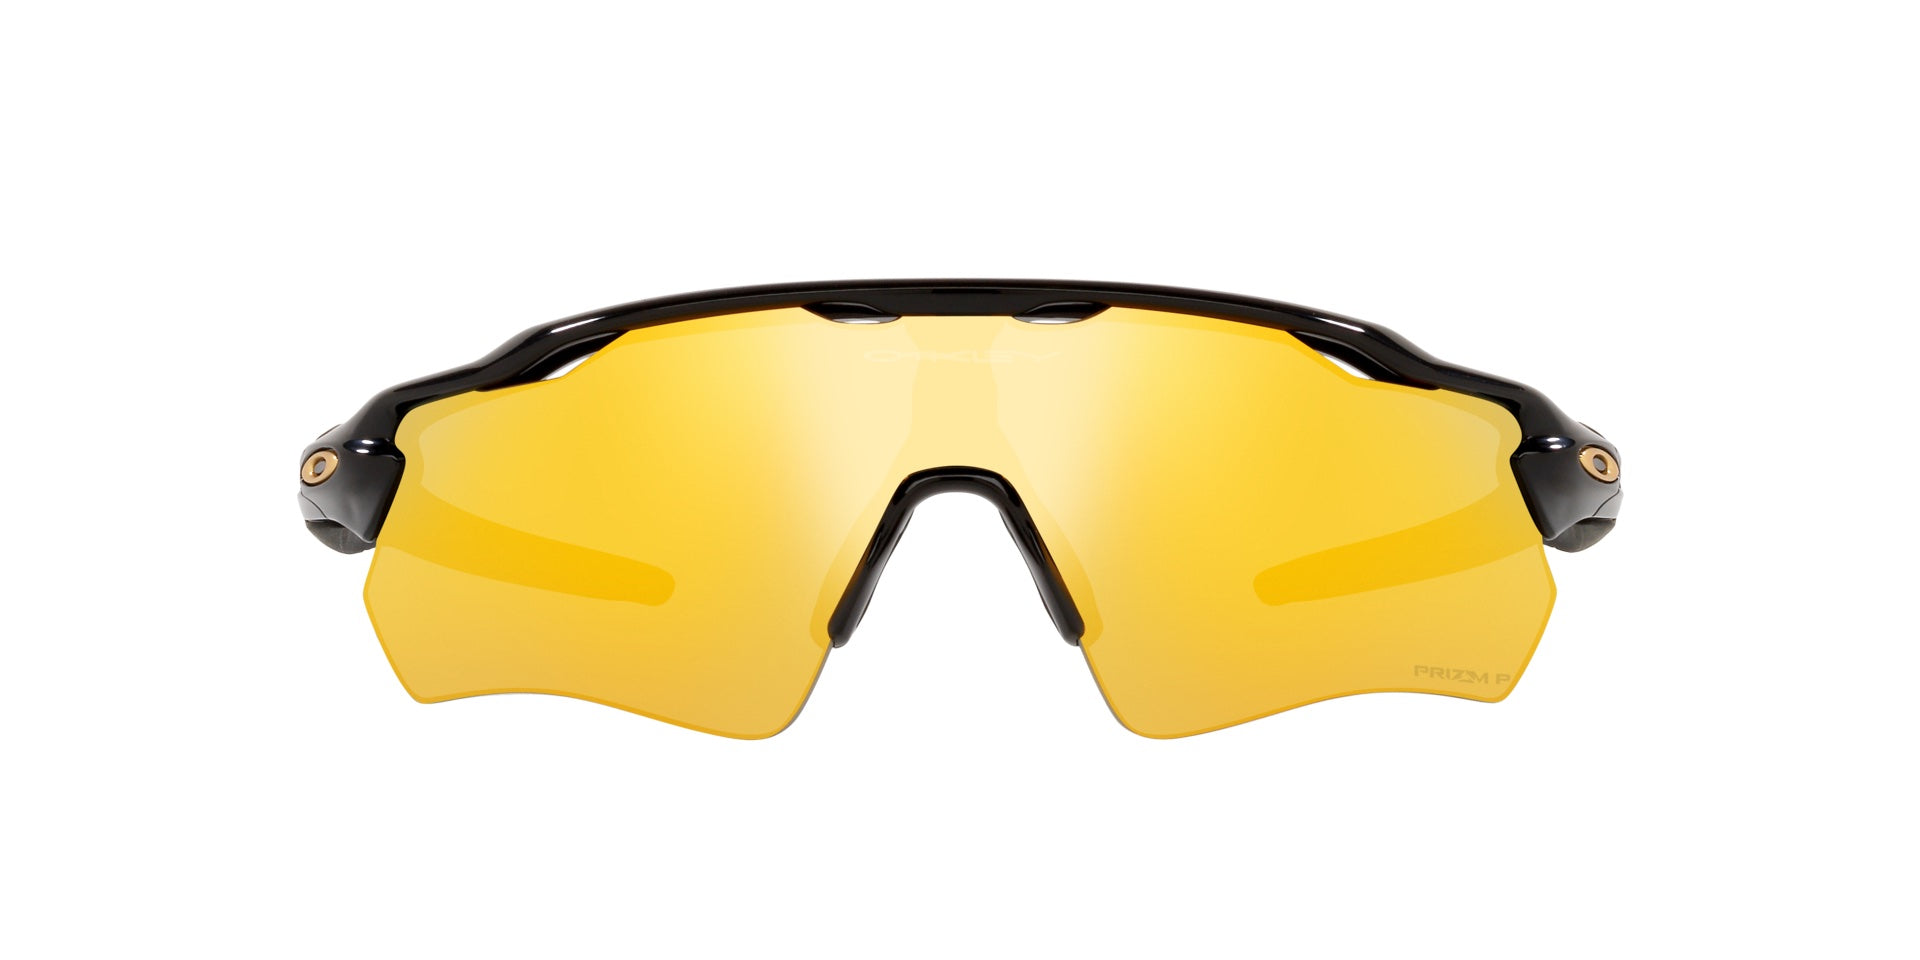 Men’s sunglasses - A front view of the Radar EV Path model:  A polished black, wrap-around frame made injected material. The lenses are 24k (Gold) and polarized. Oakley's gold logo is located by the hinges.